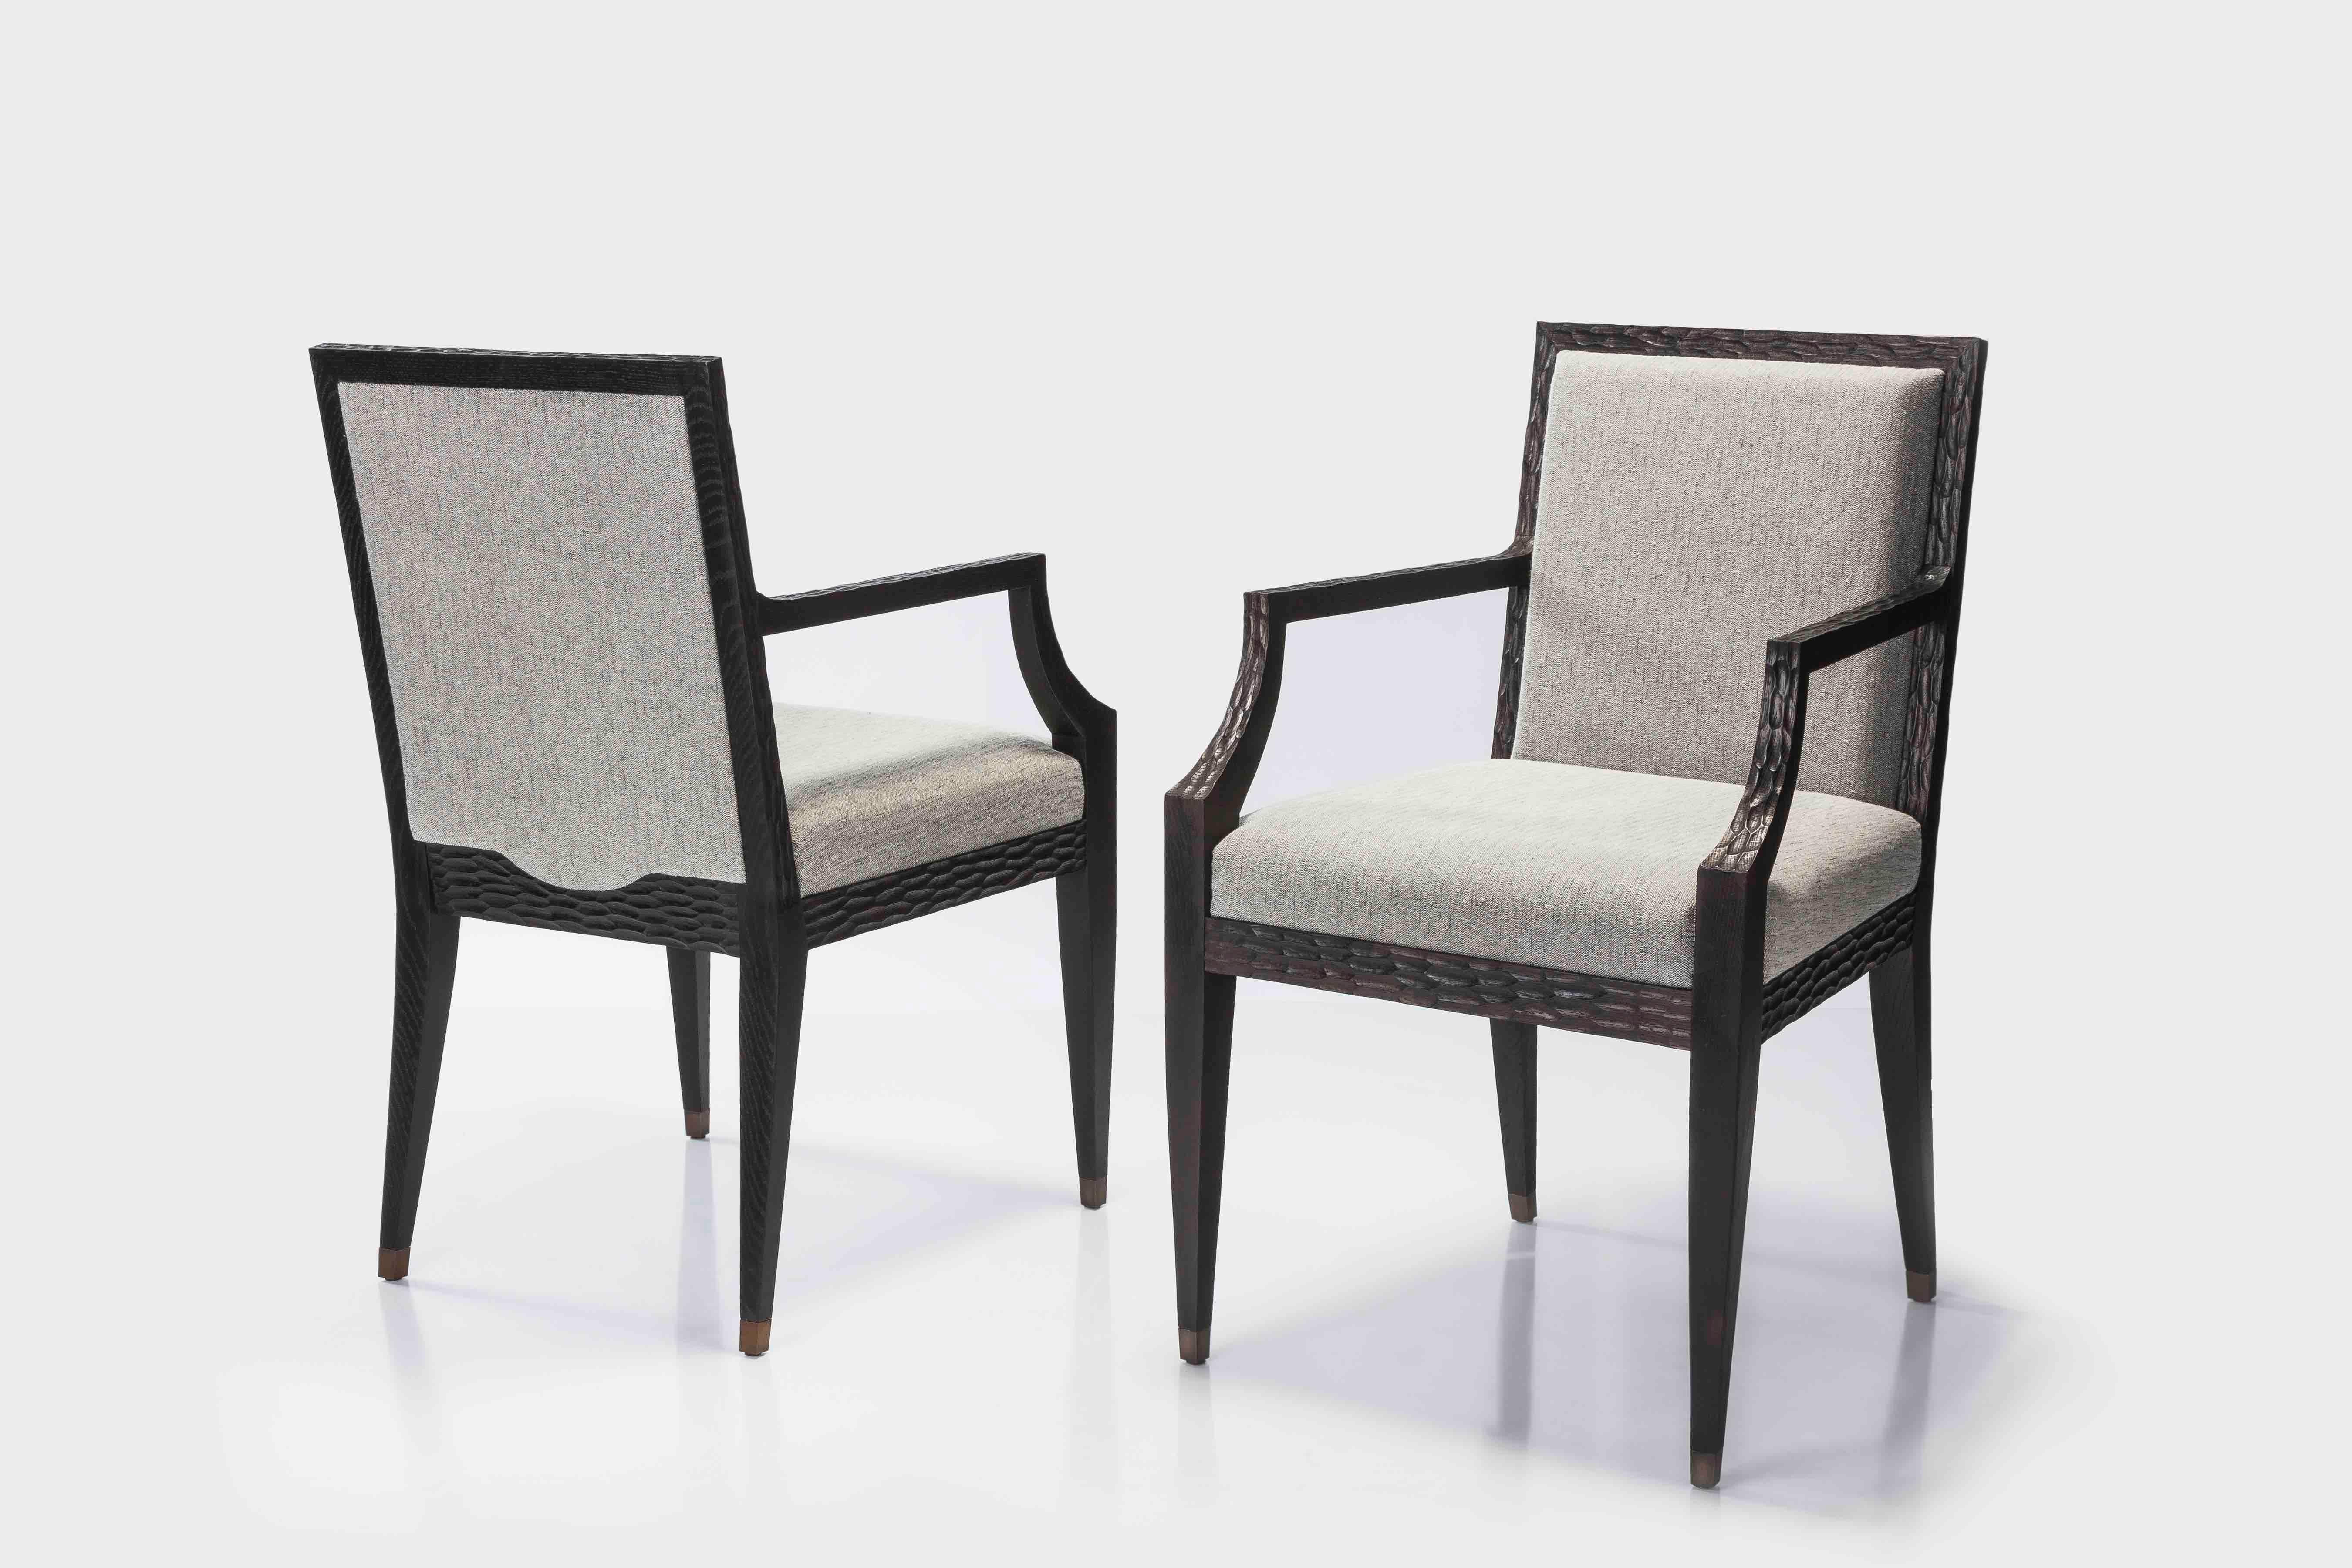 Miti Armchair by Francis Sultana for Marc de Berny In New Condition For Sale In London, GB